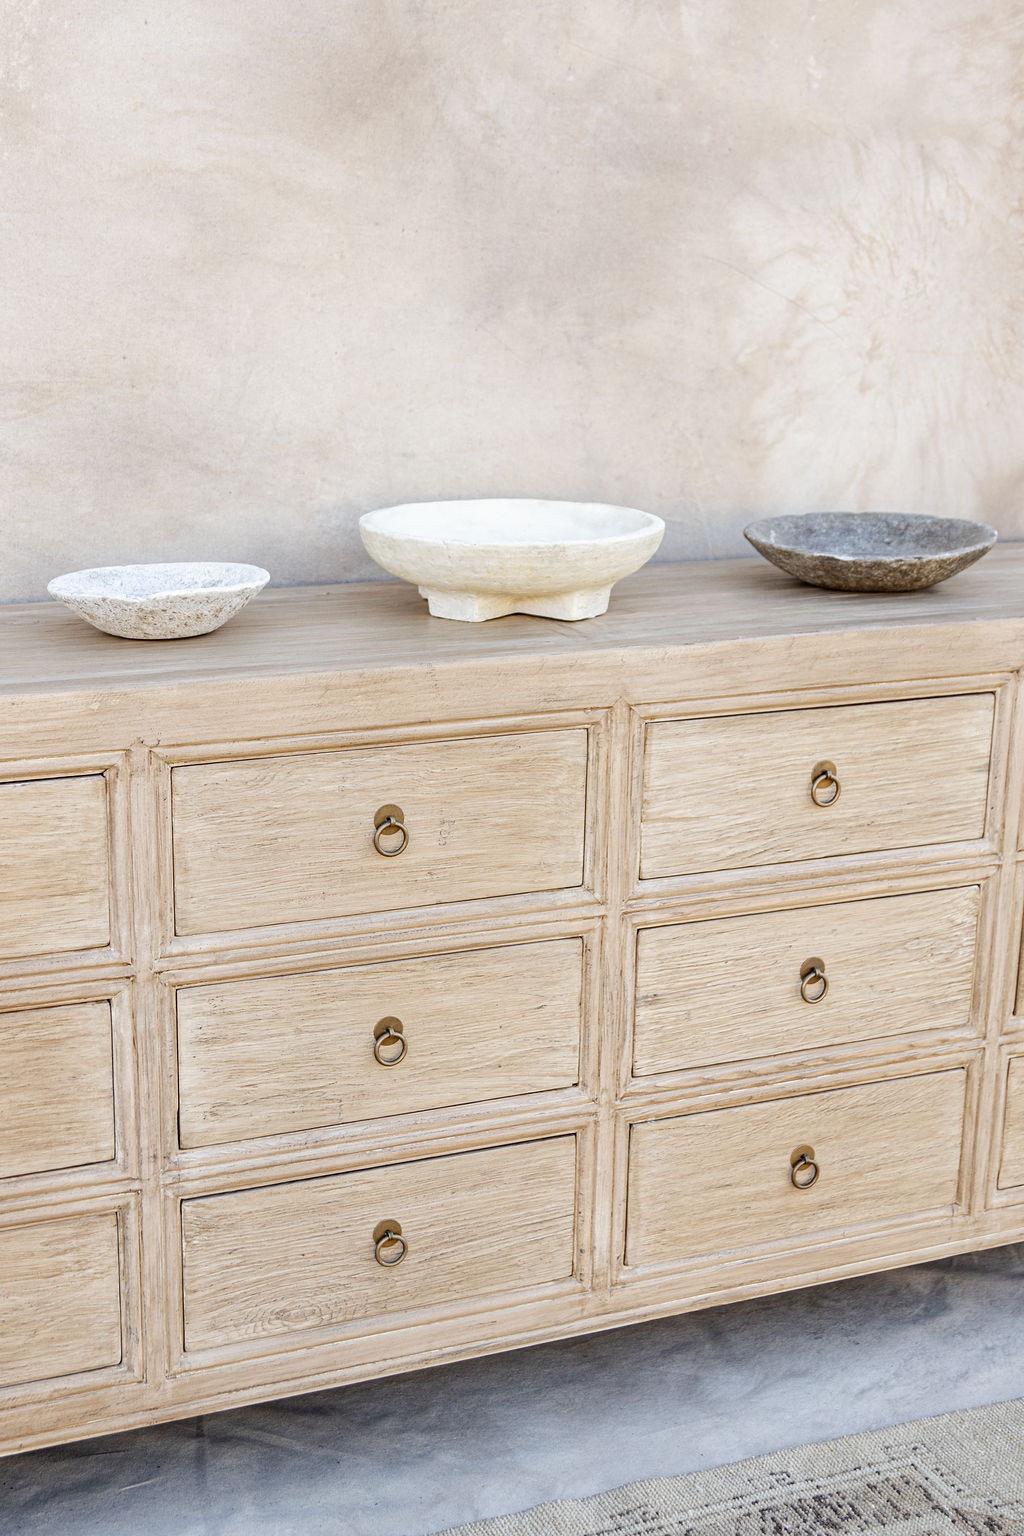 Introducing our Abbott 12 drawer dresser. Crafted from elm and oak wood sourced throughout Europe and Asia. No two pieces are the same.